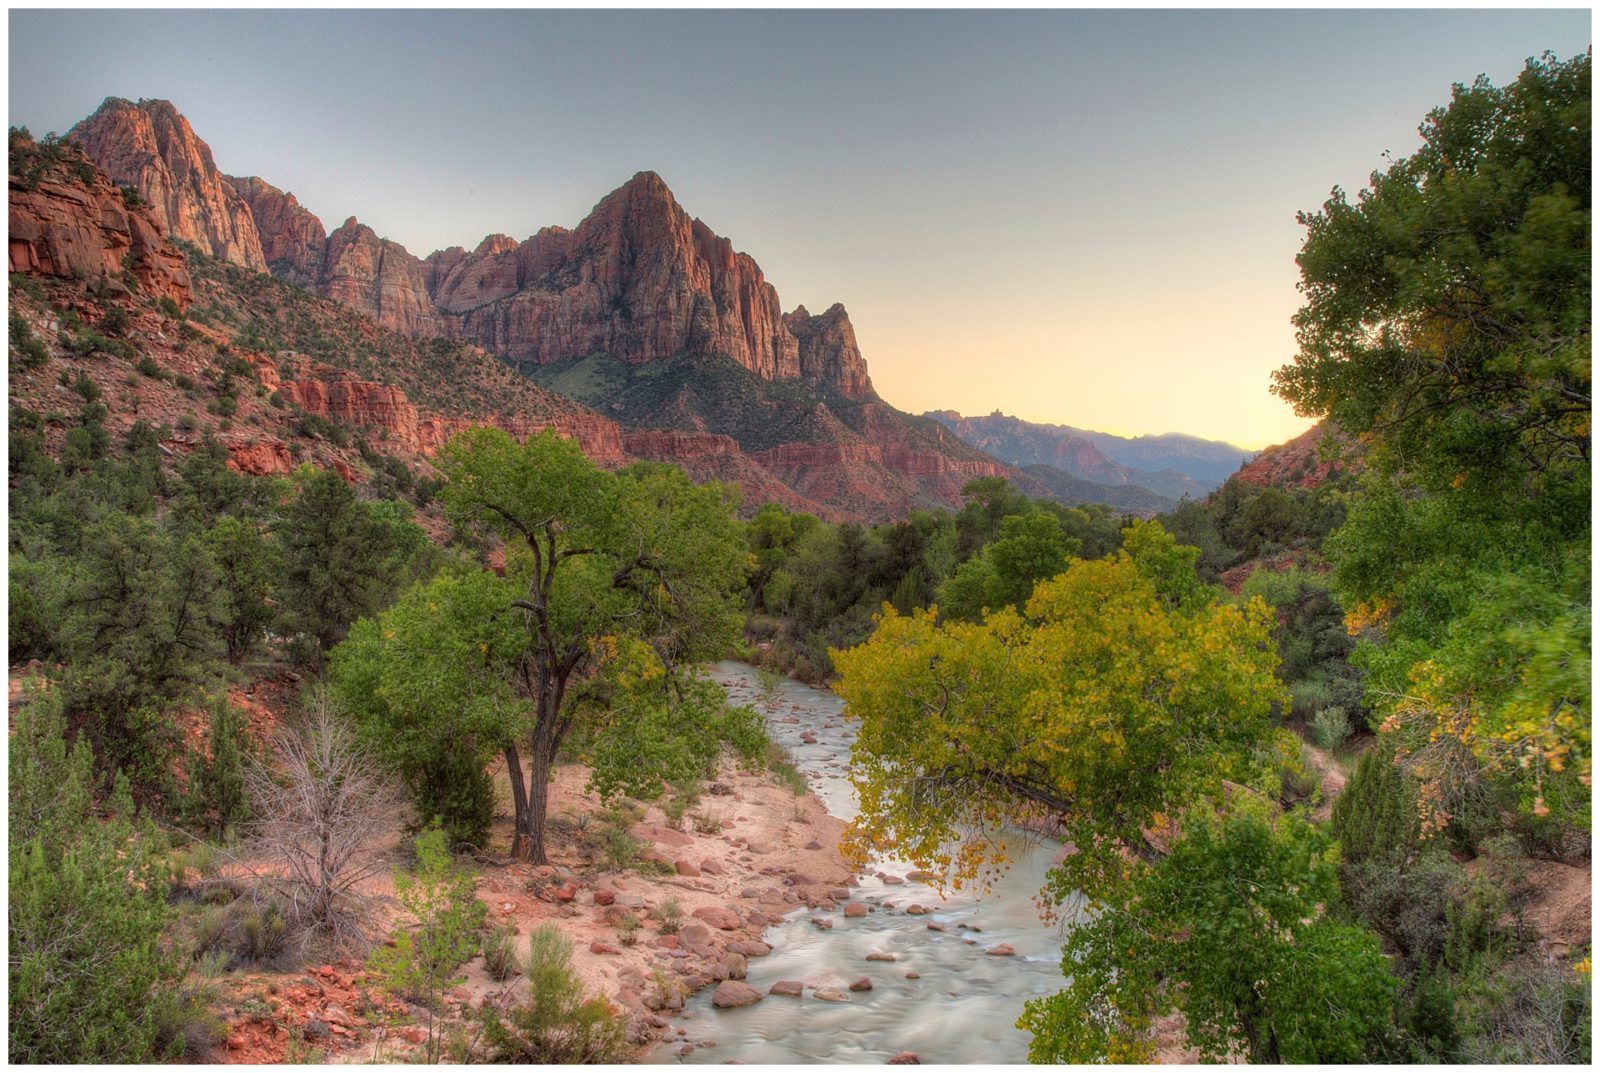 View of the Watchman Mountains in Zion National Park Utah